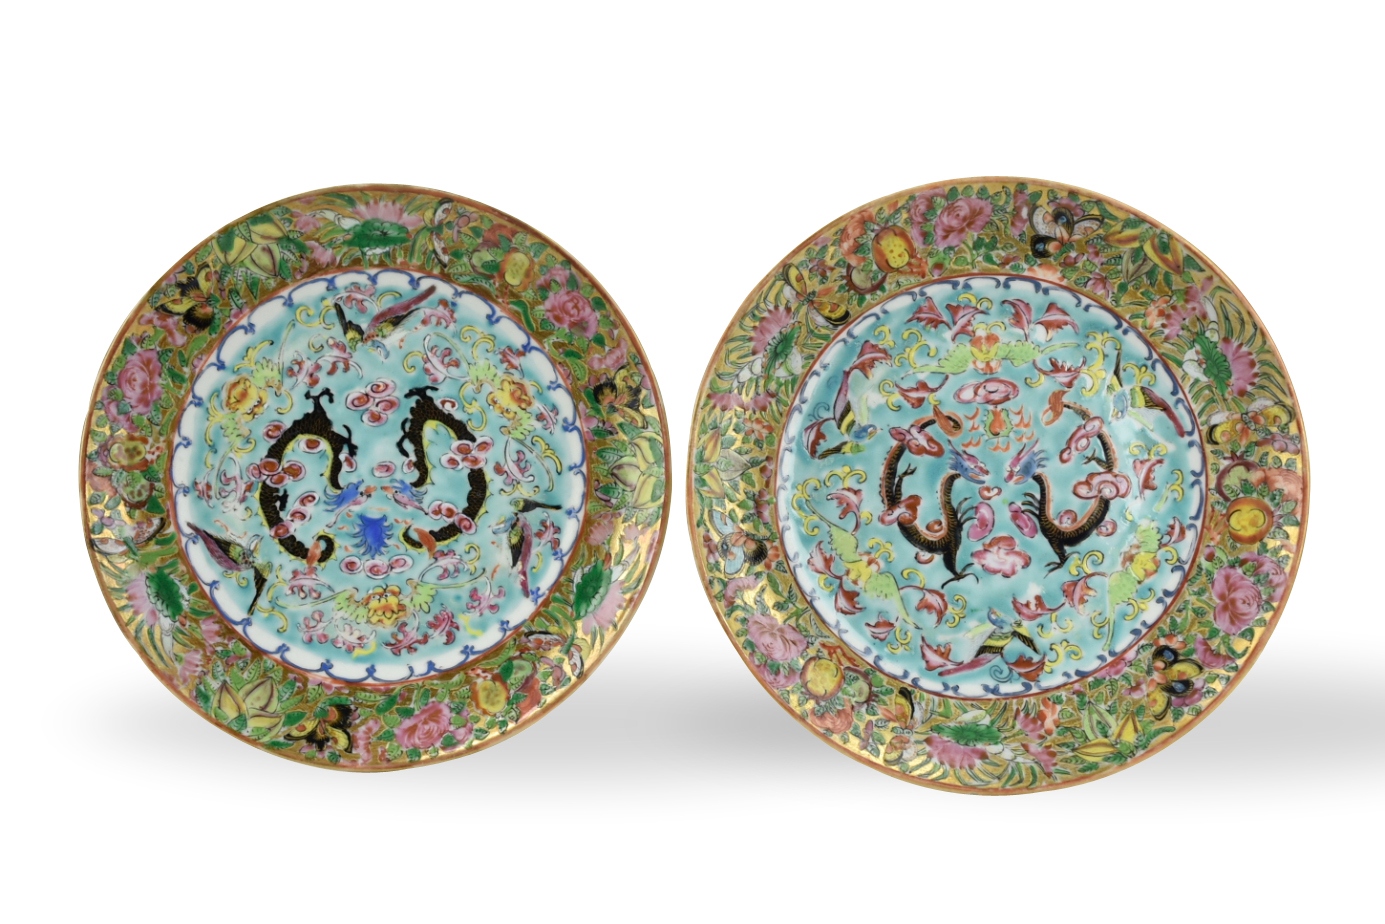 PAIR OF CHINESE CANTON GLAZED PLATE 33922a